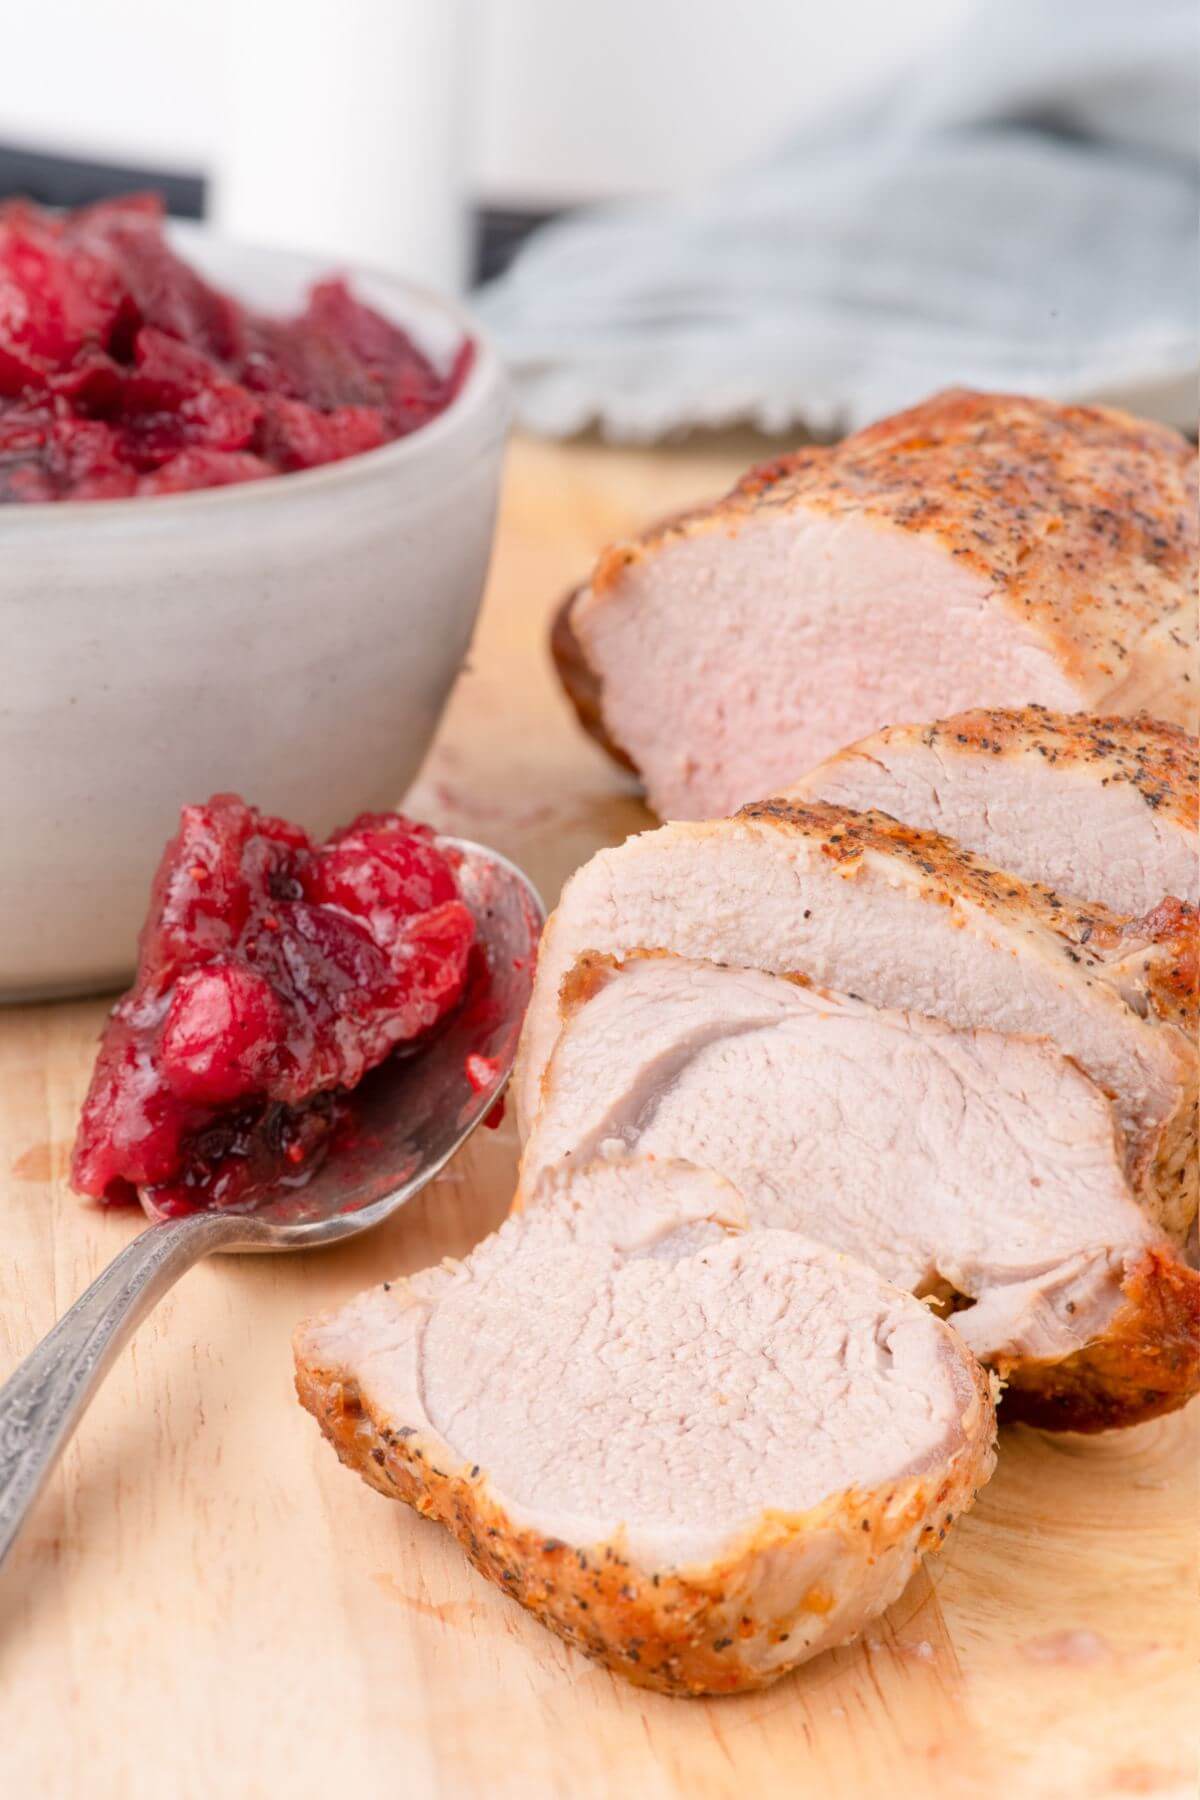 Pork Tenderloin with Date and Cranberry Chutney in spoon by the side.